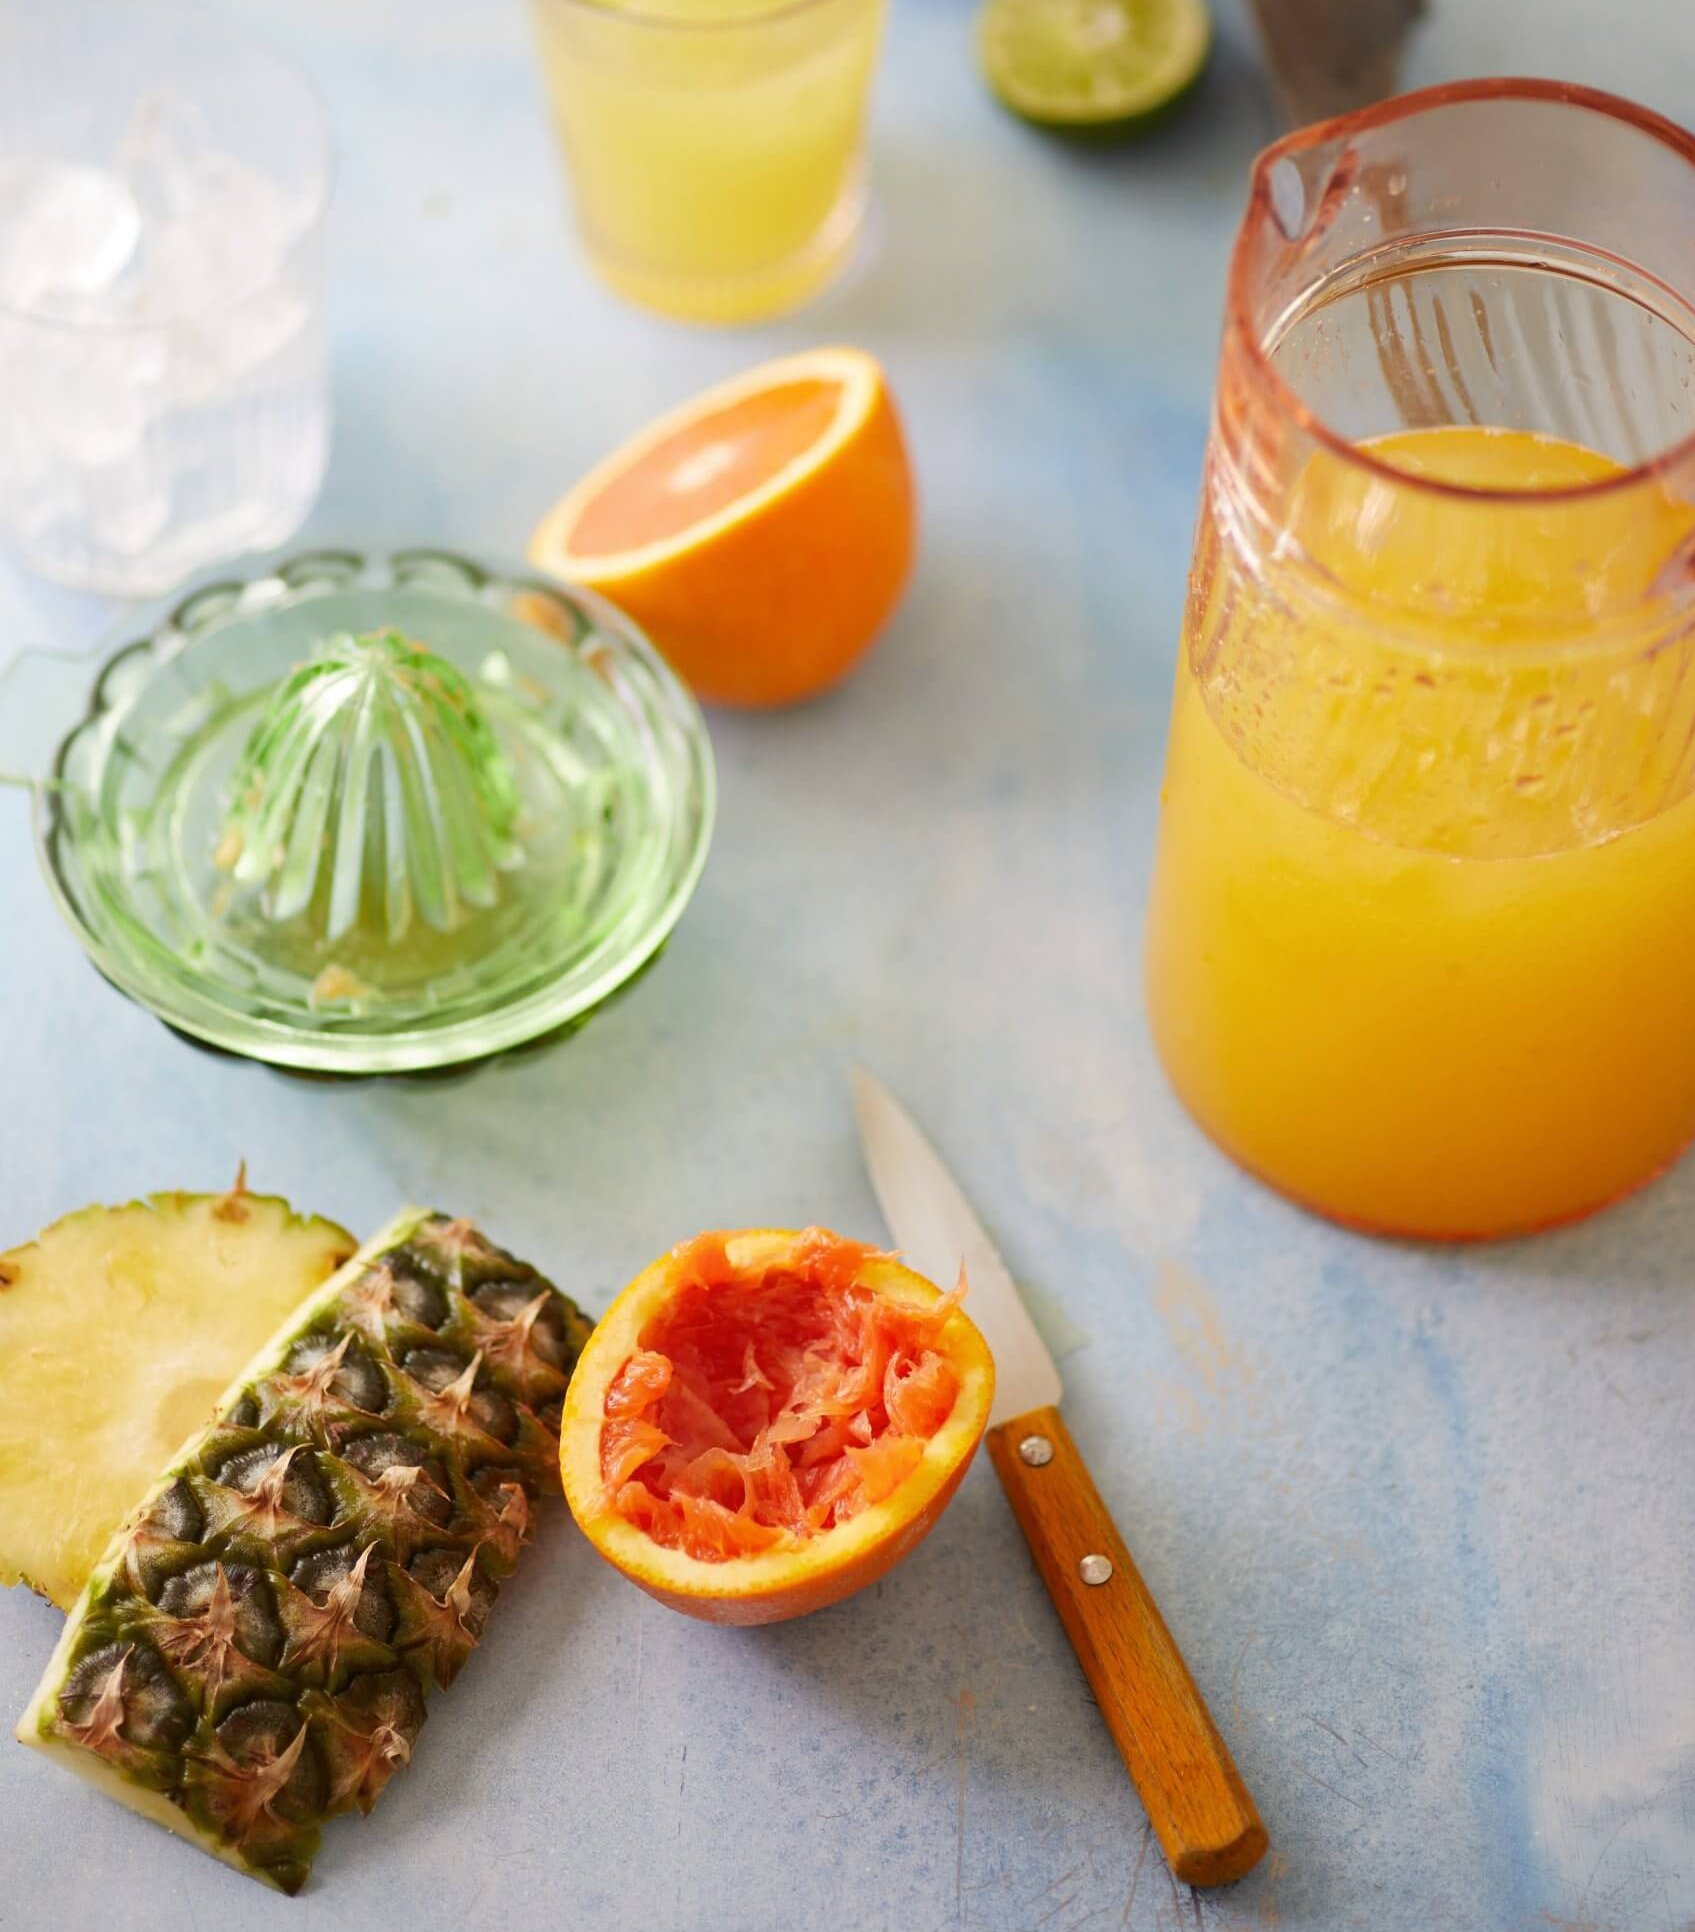 Sliced oranges, pineapples and limes on a white surface with a green glass juicer and pitcher of juice nearby